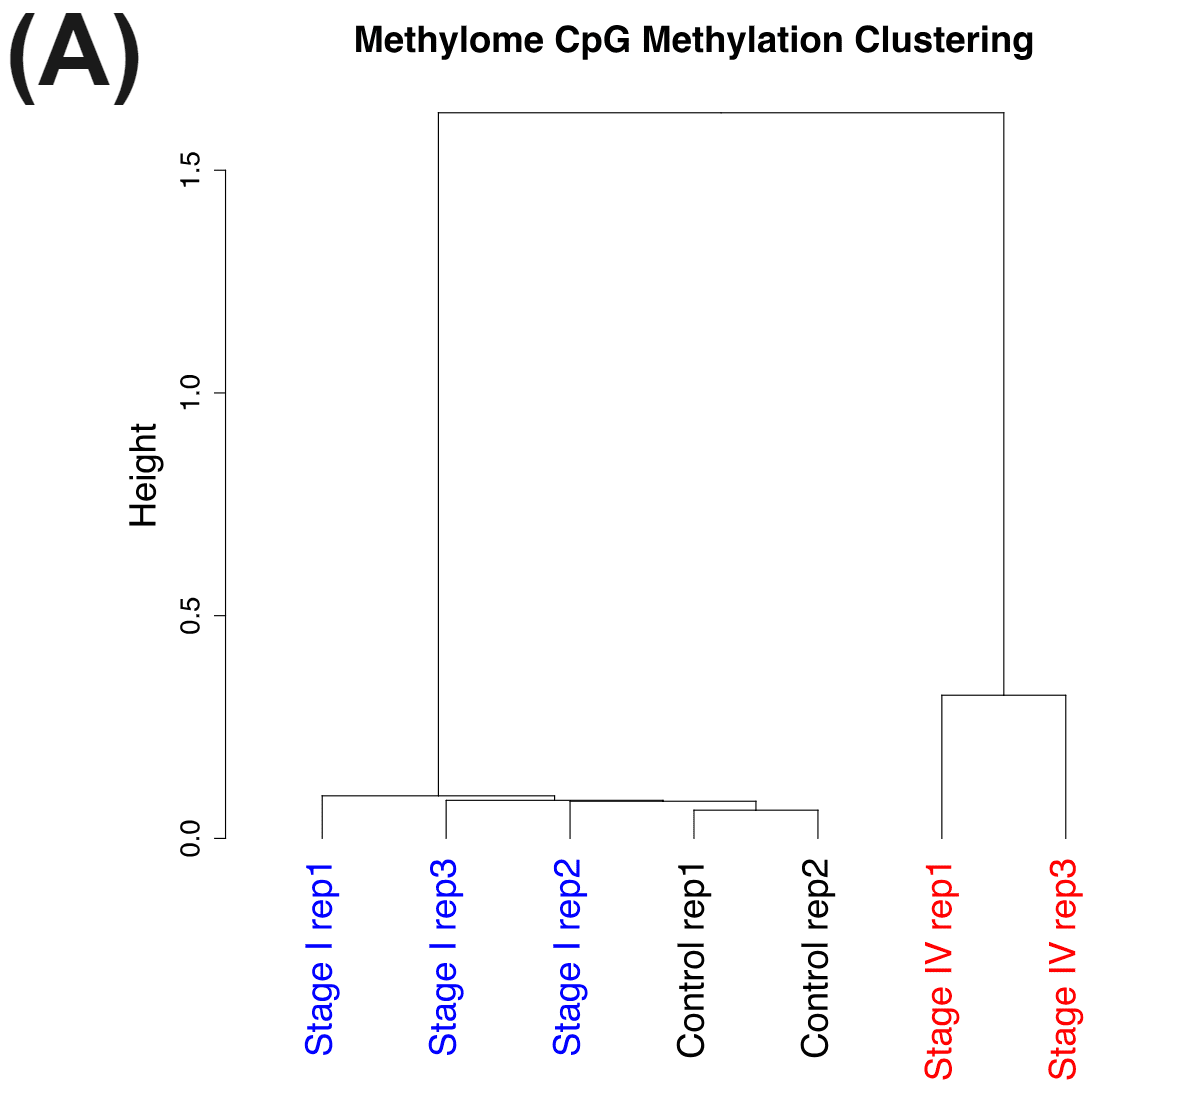 Methylome CpG methylation clustering of Healthy and CRC samples using duet evoC